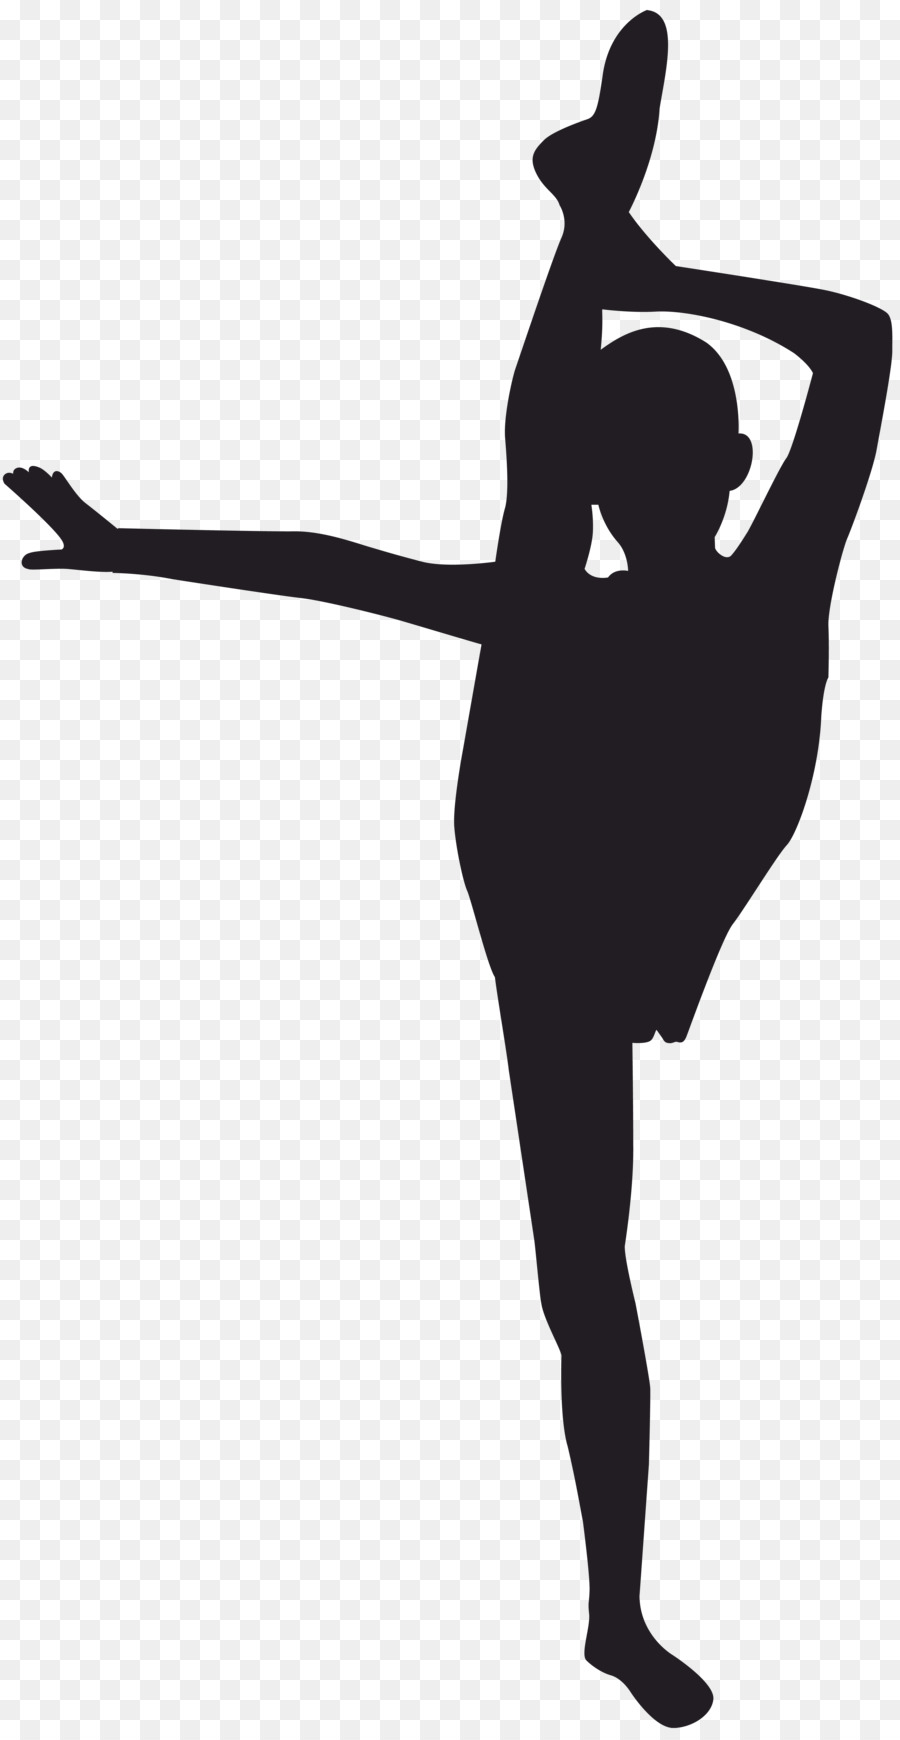 Silhouette Clip art - Silhouette png download - 4143*8000 - Free Transparent Silhouette png Download.